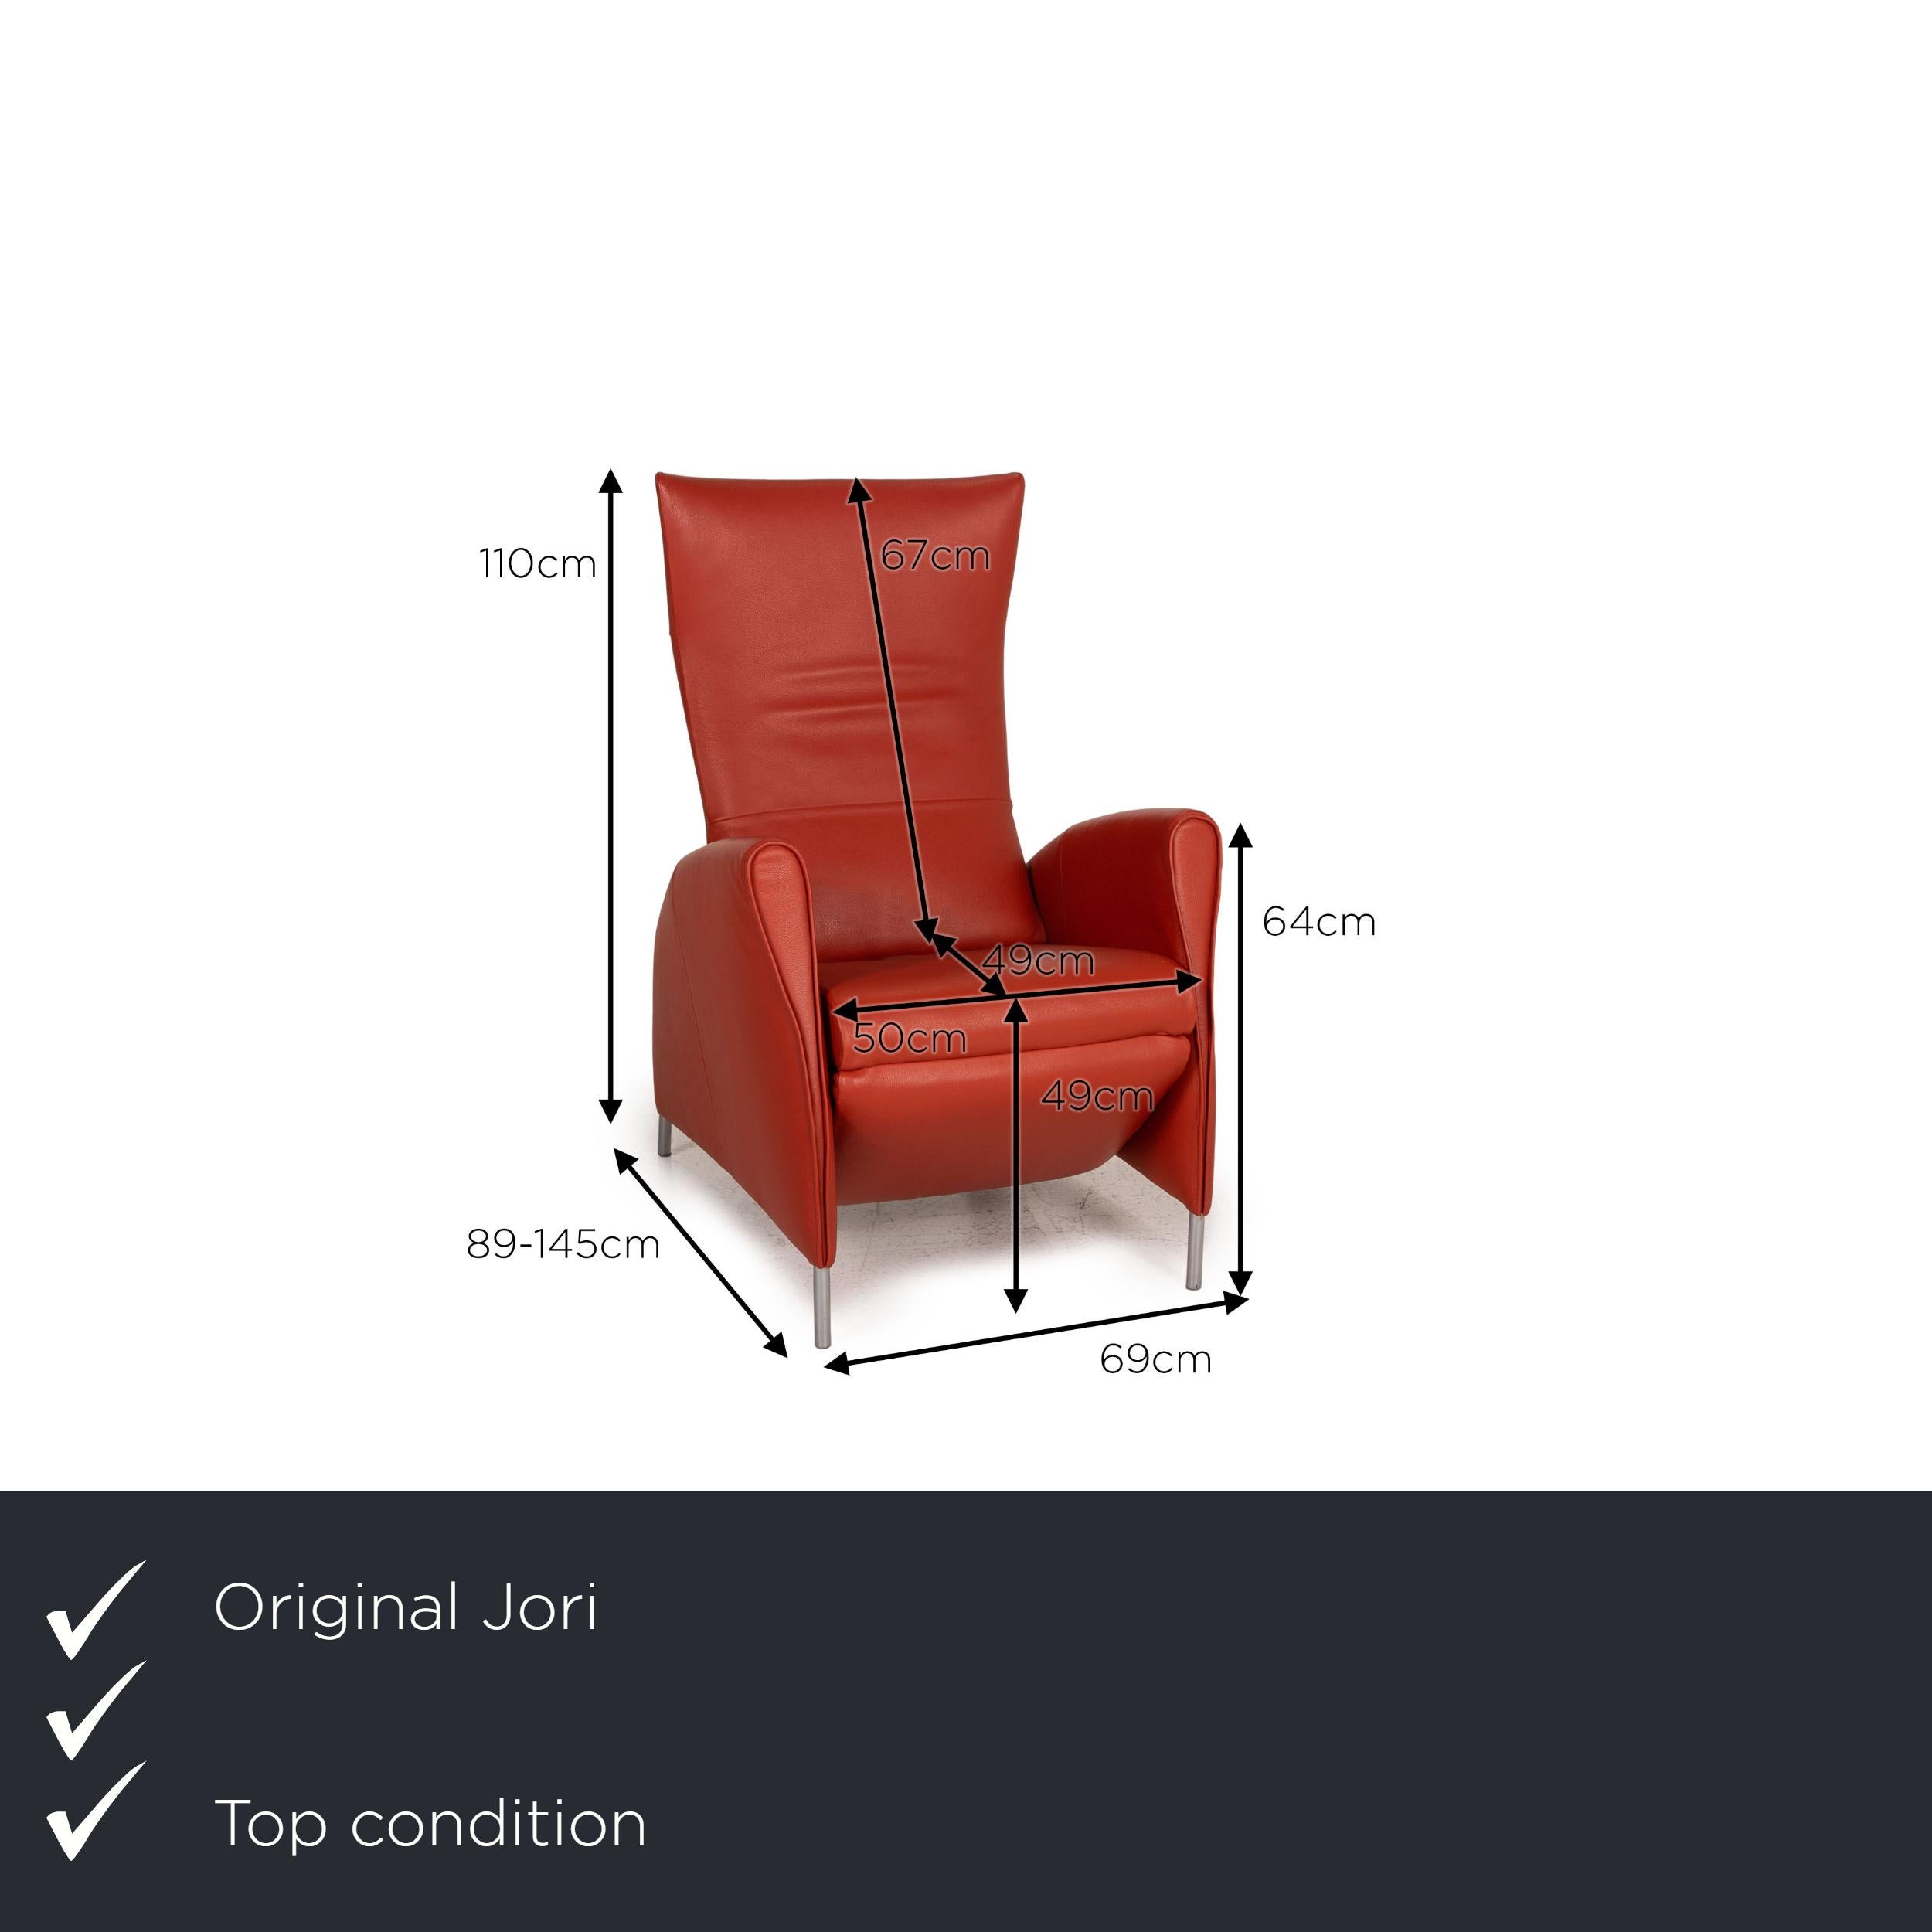 We present to you a Jori JR 3490 leather armchair red relaxation armchair function.
 

 Product measurements in centimeters:
 

Depth: 89
Width: 69
Height: 110
Seat height: 49
Rest height: 64
Seat depth: 49
Seat width: 50
Back height: